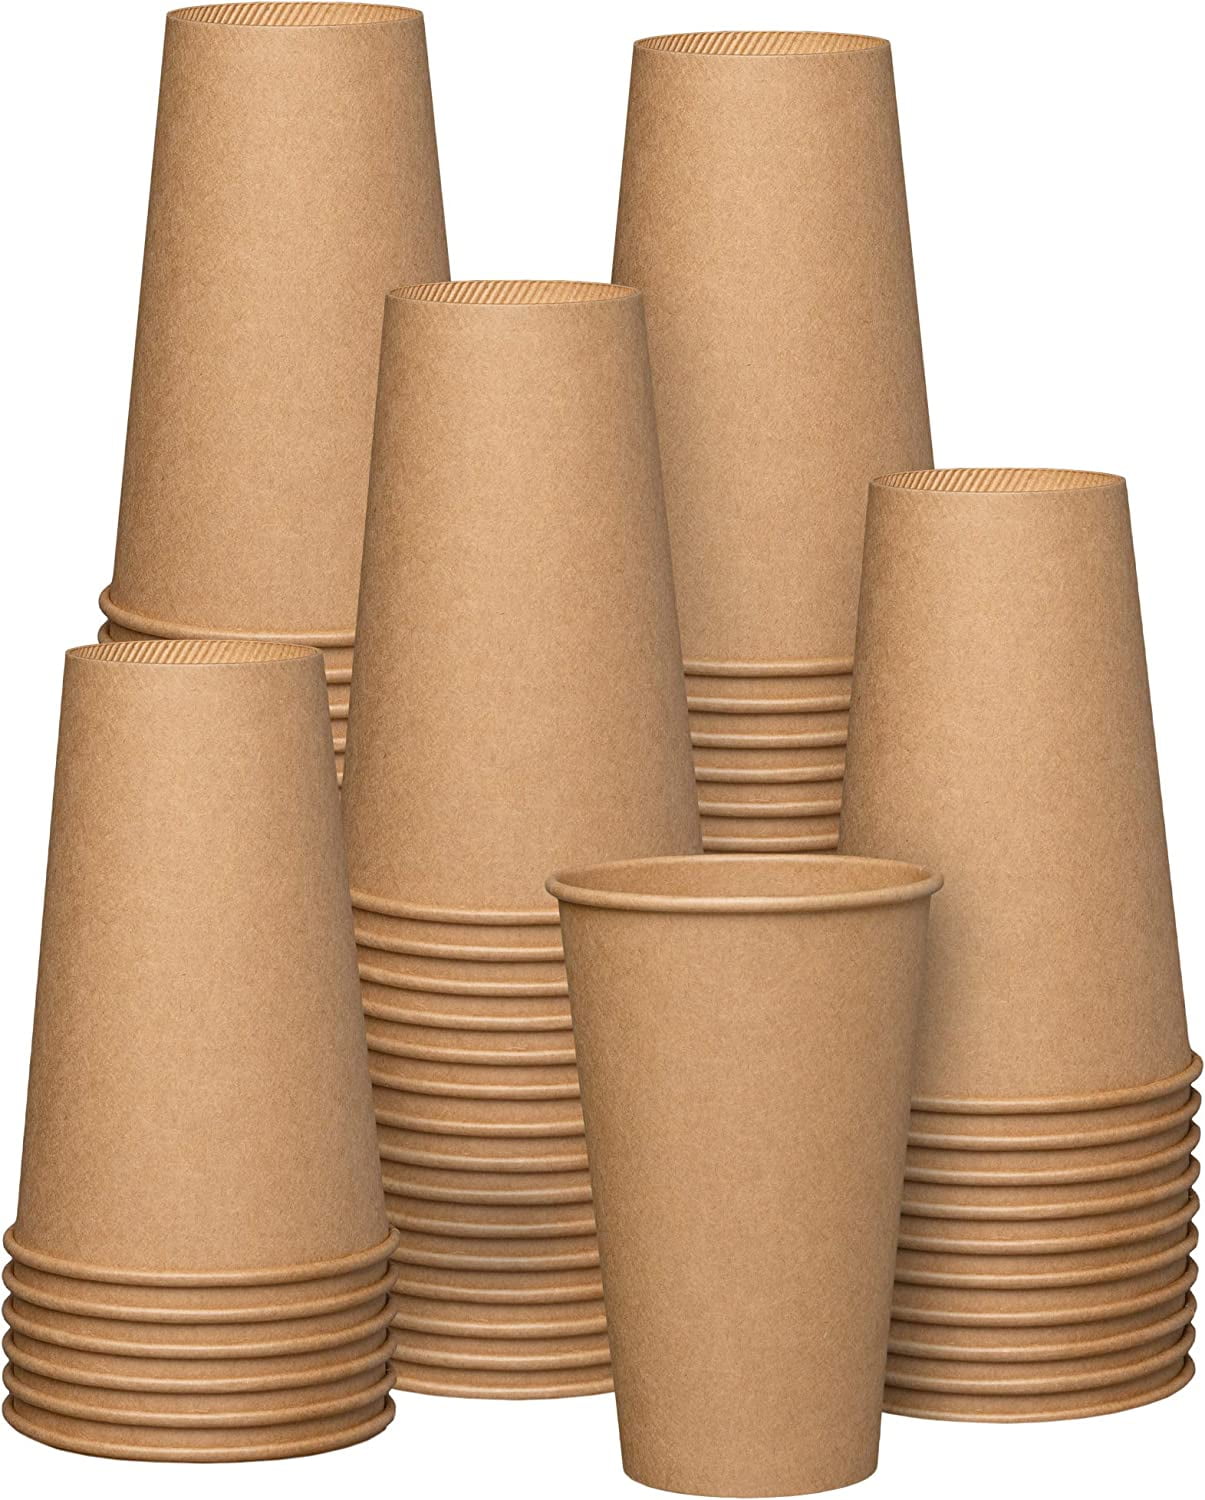 KRAFT PAPER CUP SINGLE WALL WATER-BASED LINING- 12OZ - Paper cups